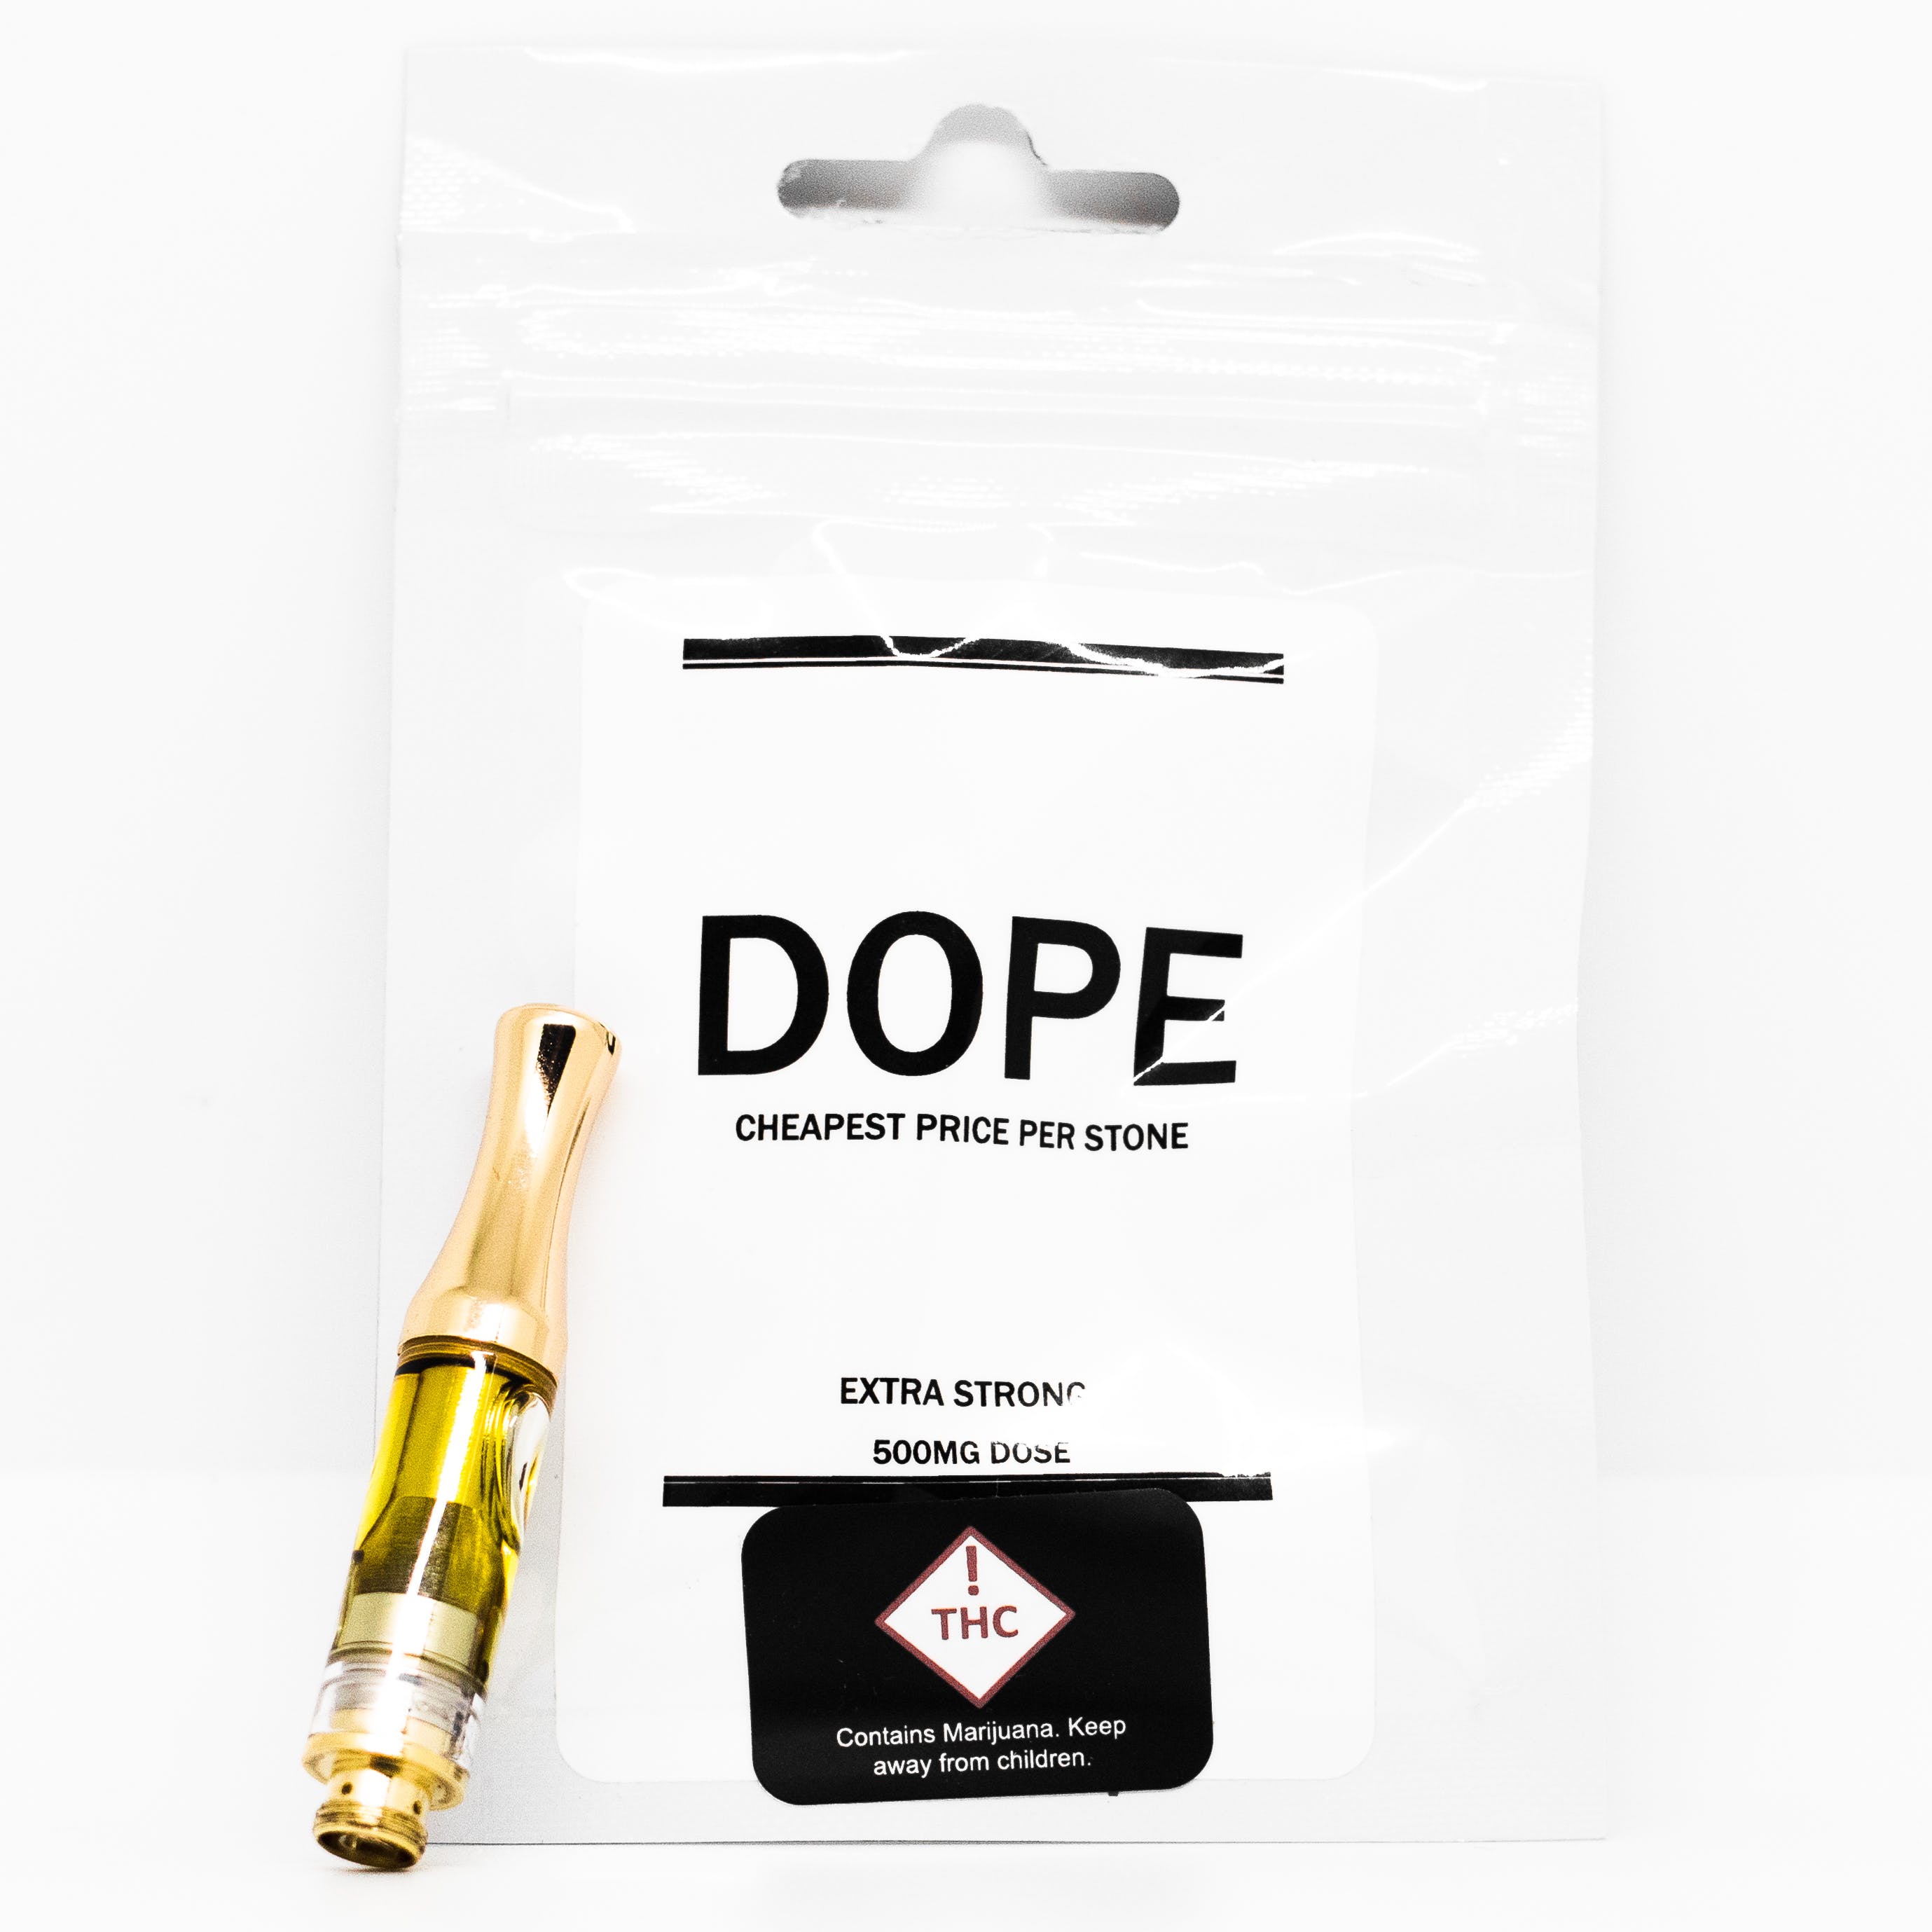 concentrate-great-deal-dope-500mg-cartridge-hybrid